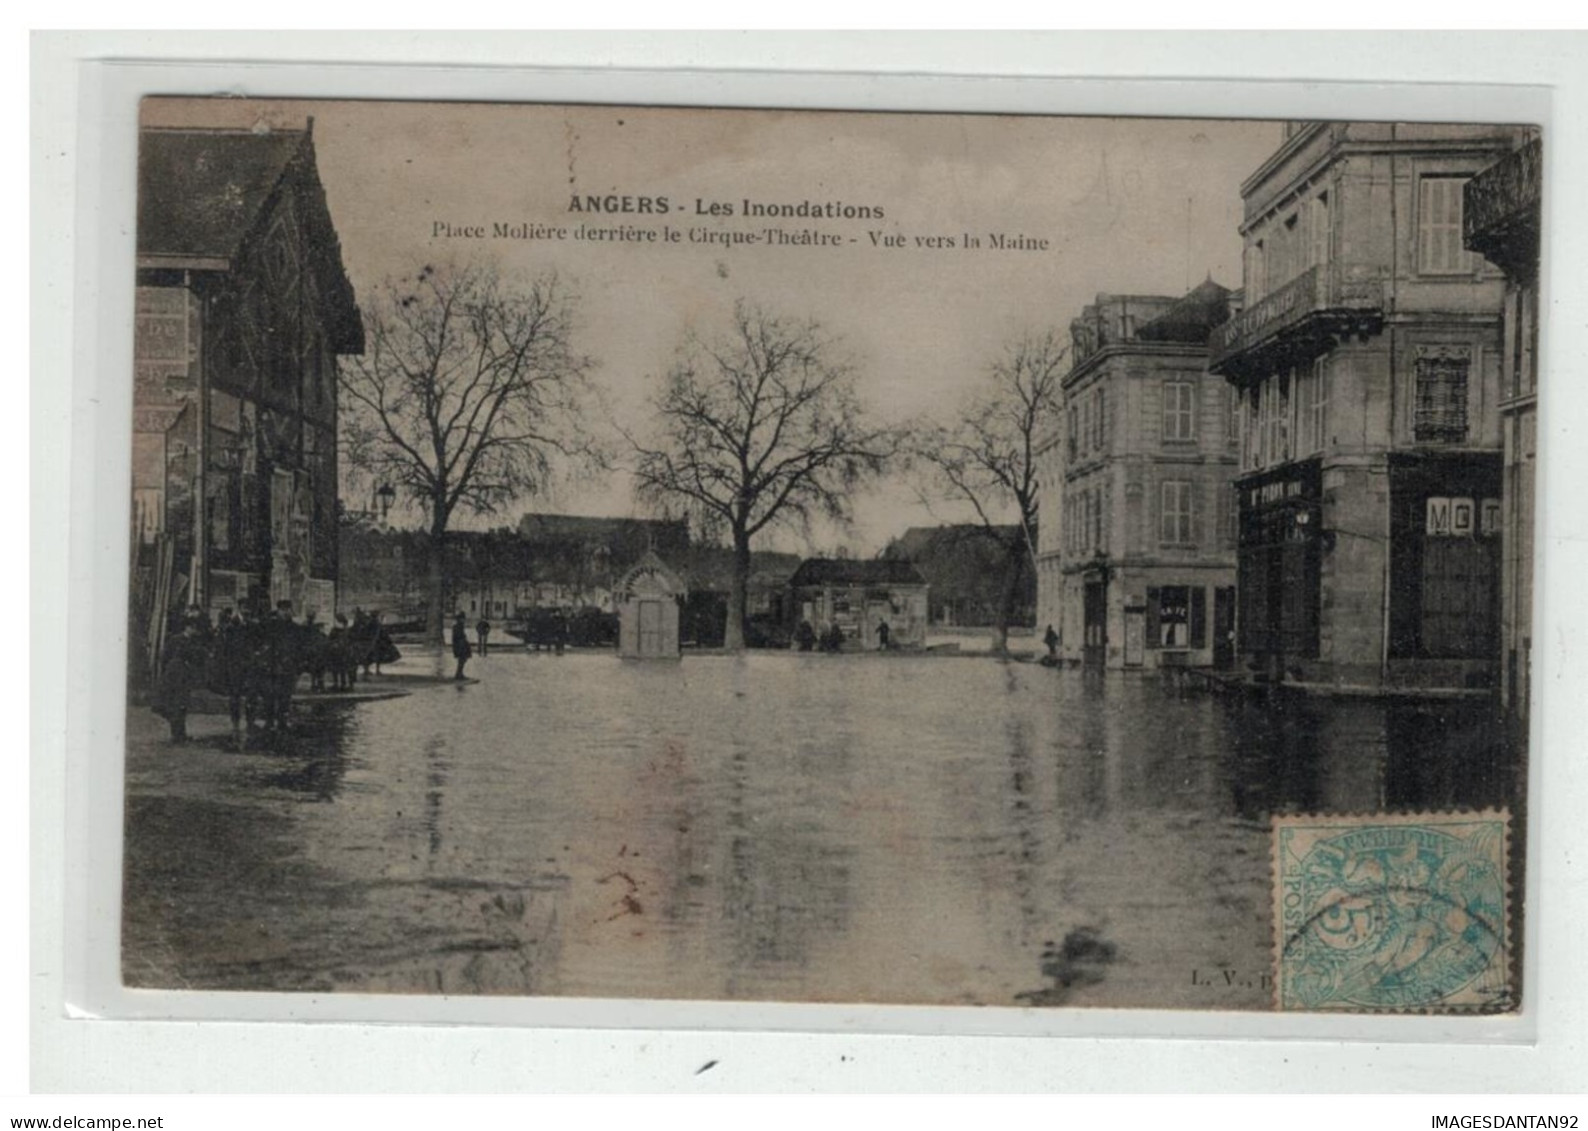 49 ANGERS LES INONDATIONS PLACE MOLIERE DERRIERE CIRQUE THEATRE - Angers